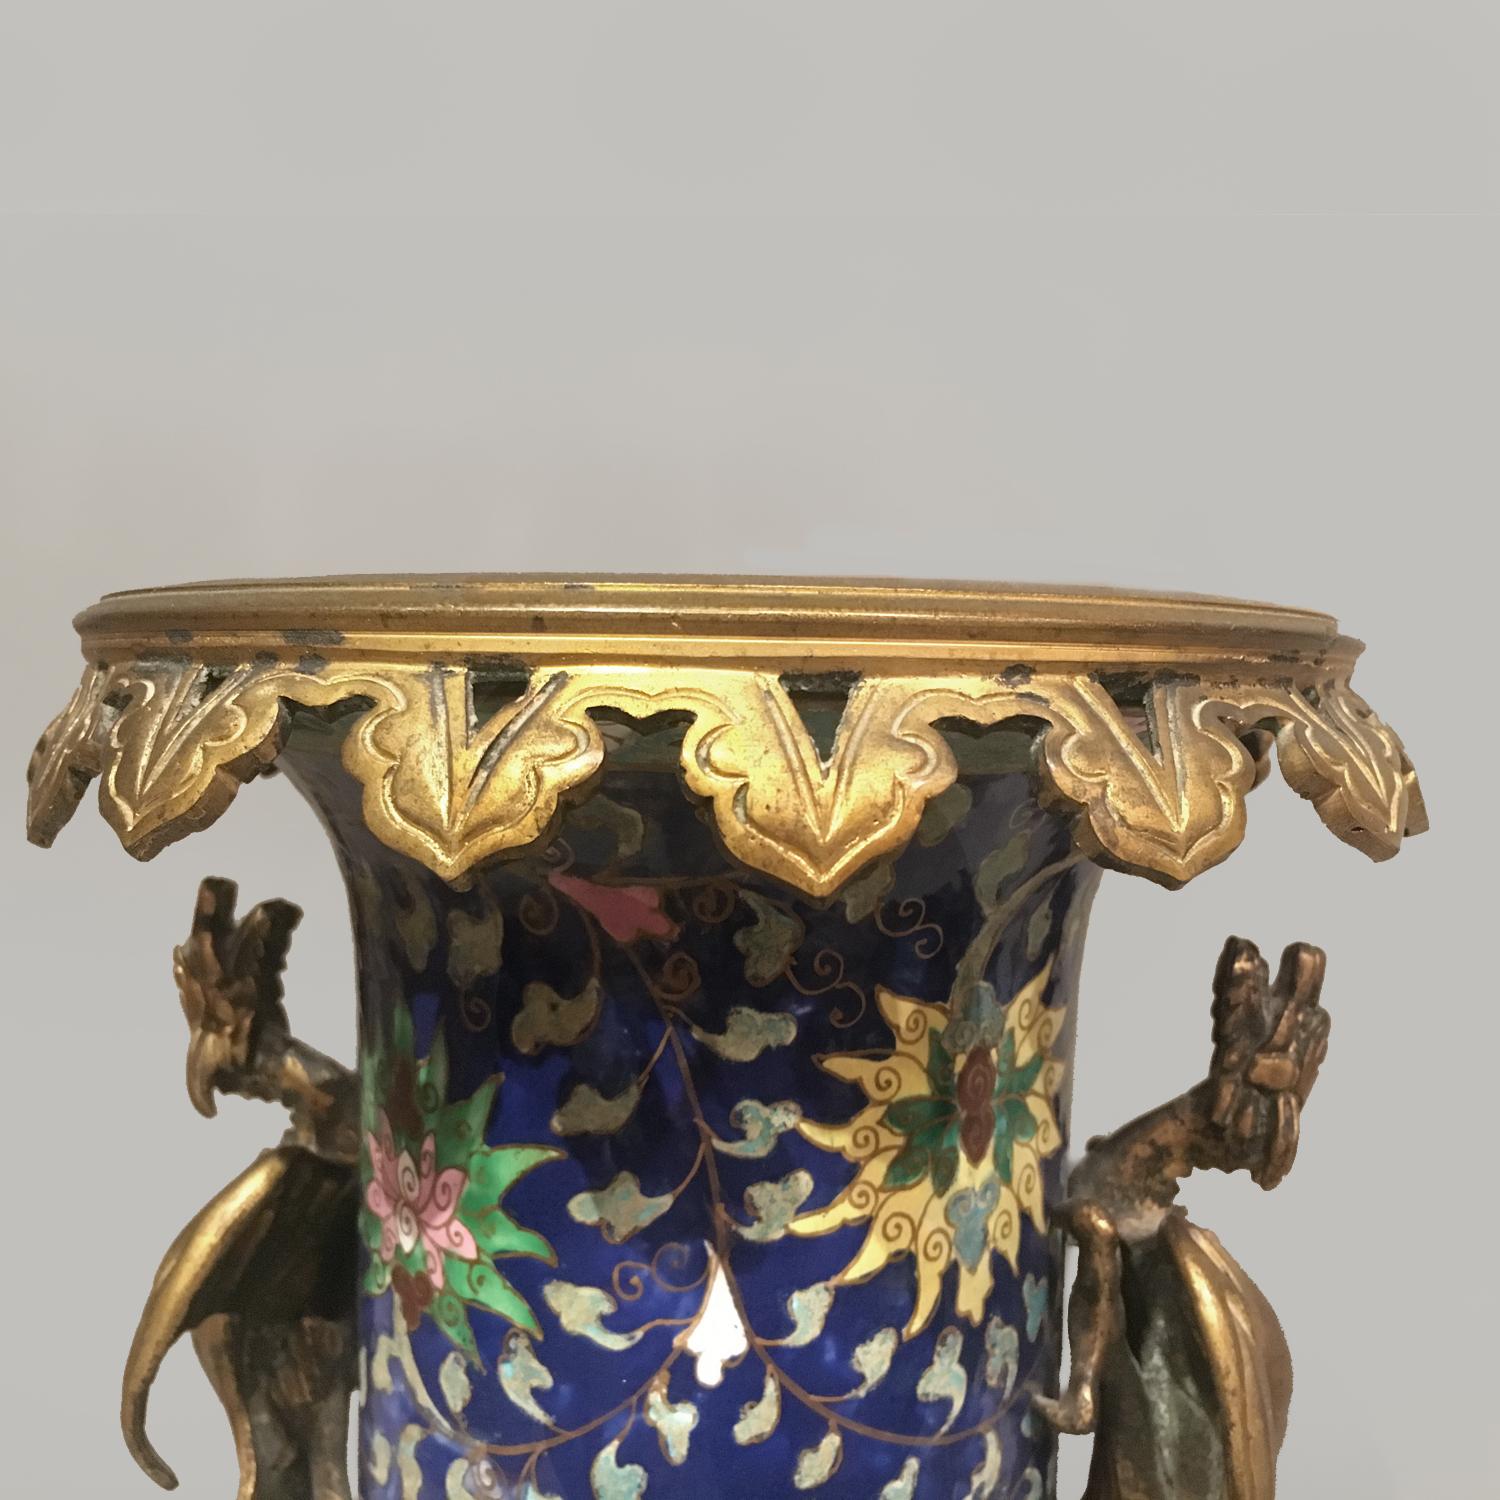 Chinoiserie Chinese-Style Porcelain Vase In The Manner of Ferdinand Barbedienne For Sale